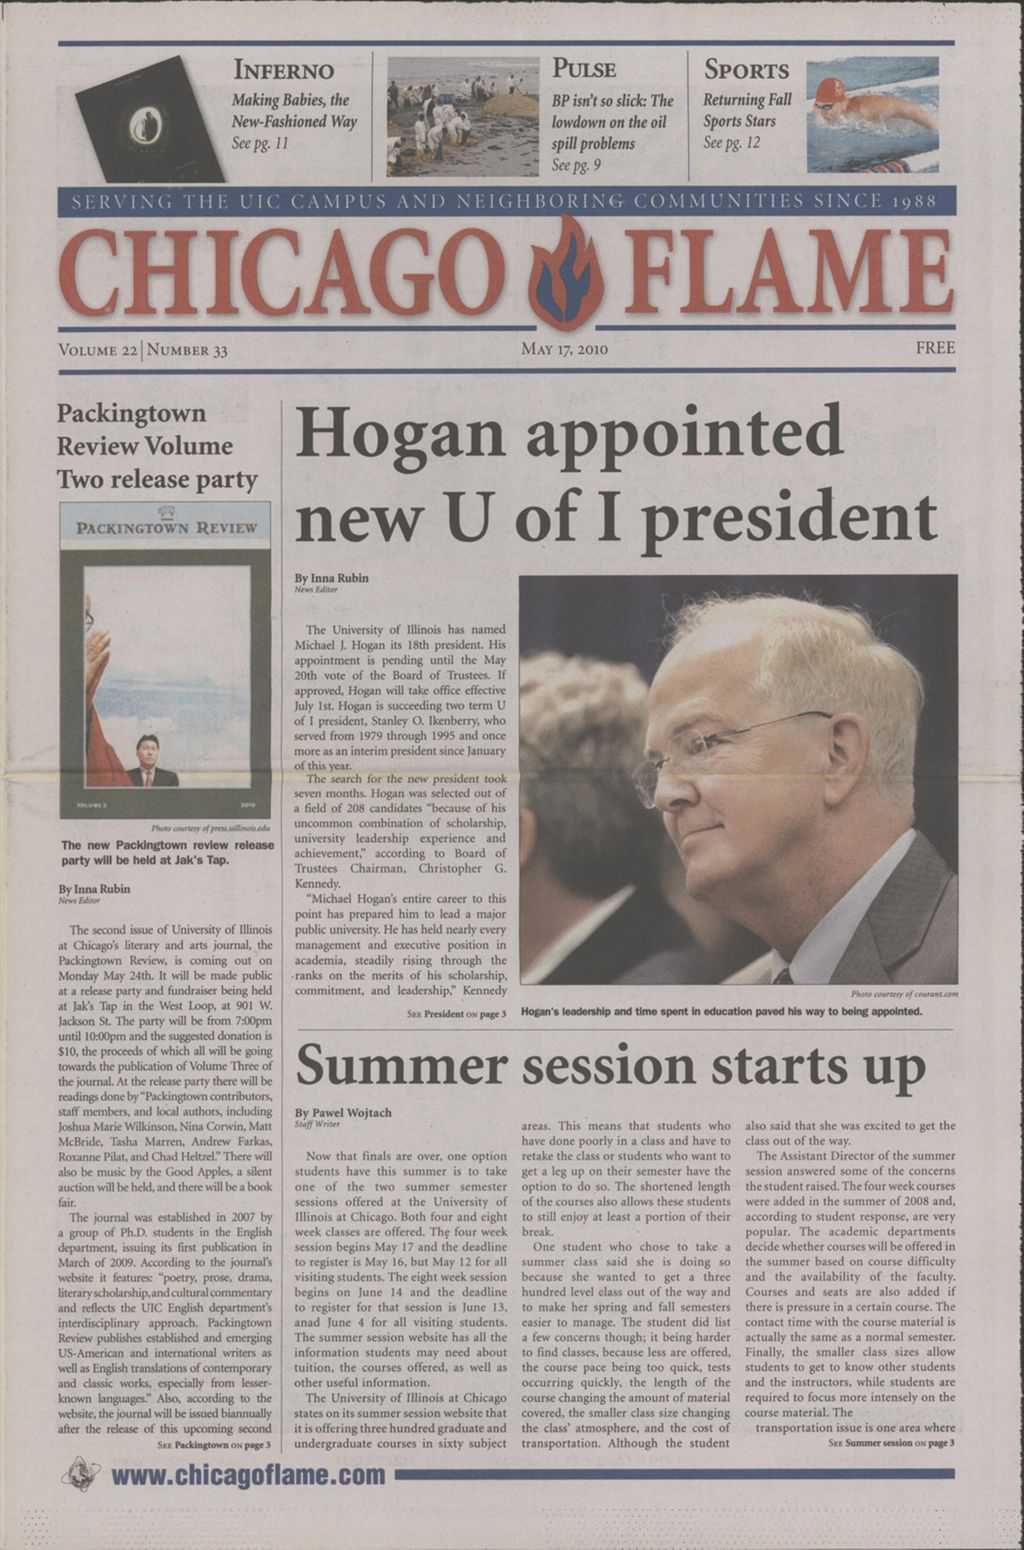 Chicago Flame (May 17, 2010)